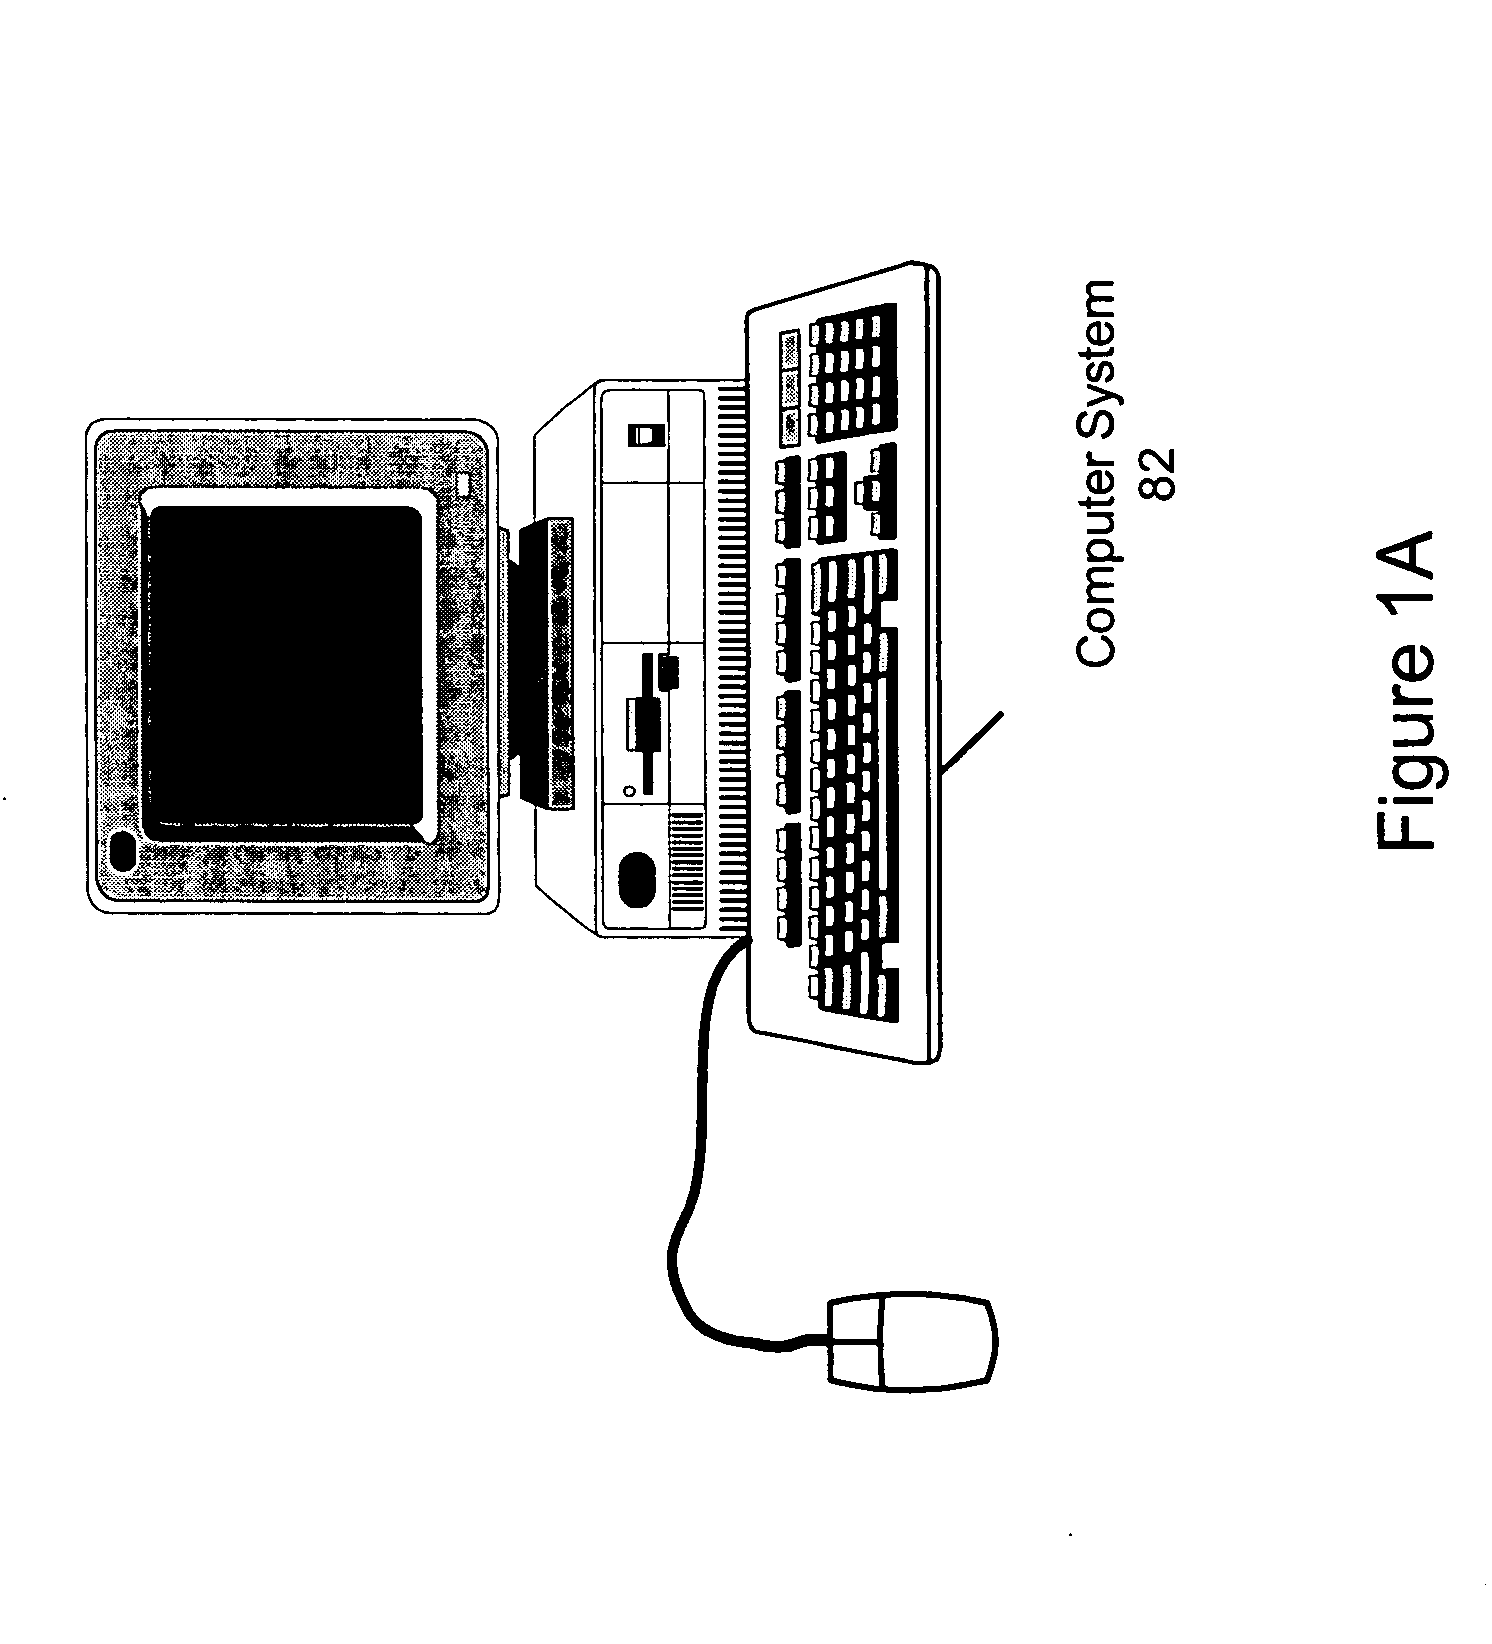 Automatic generation of application domain specific graphical programs